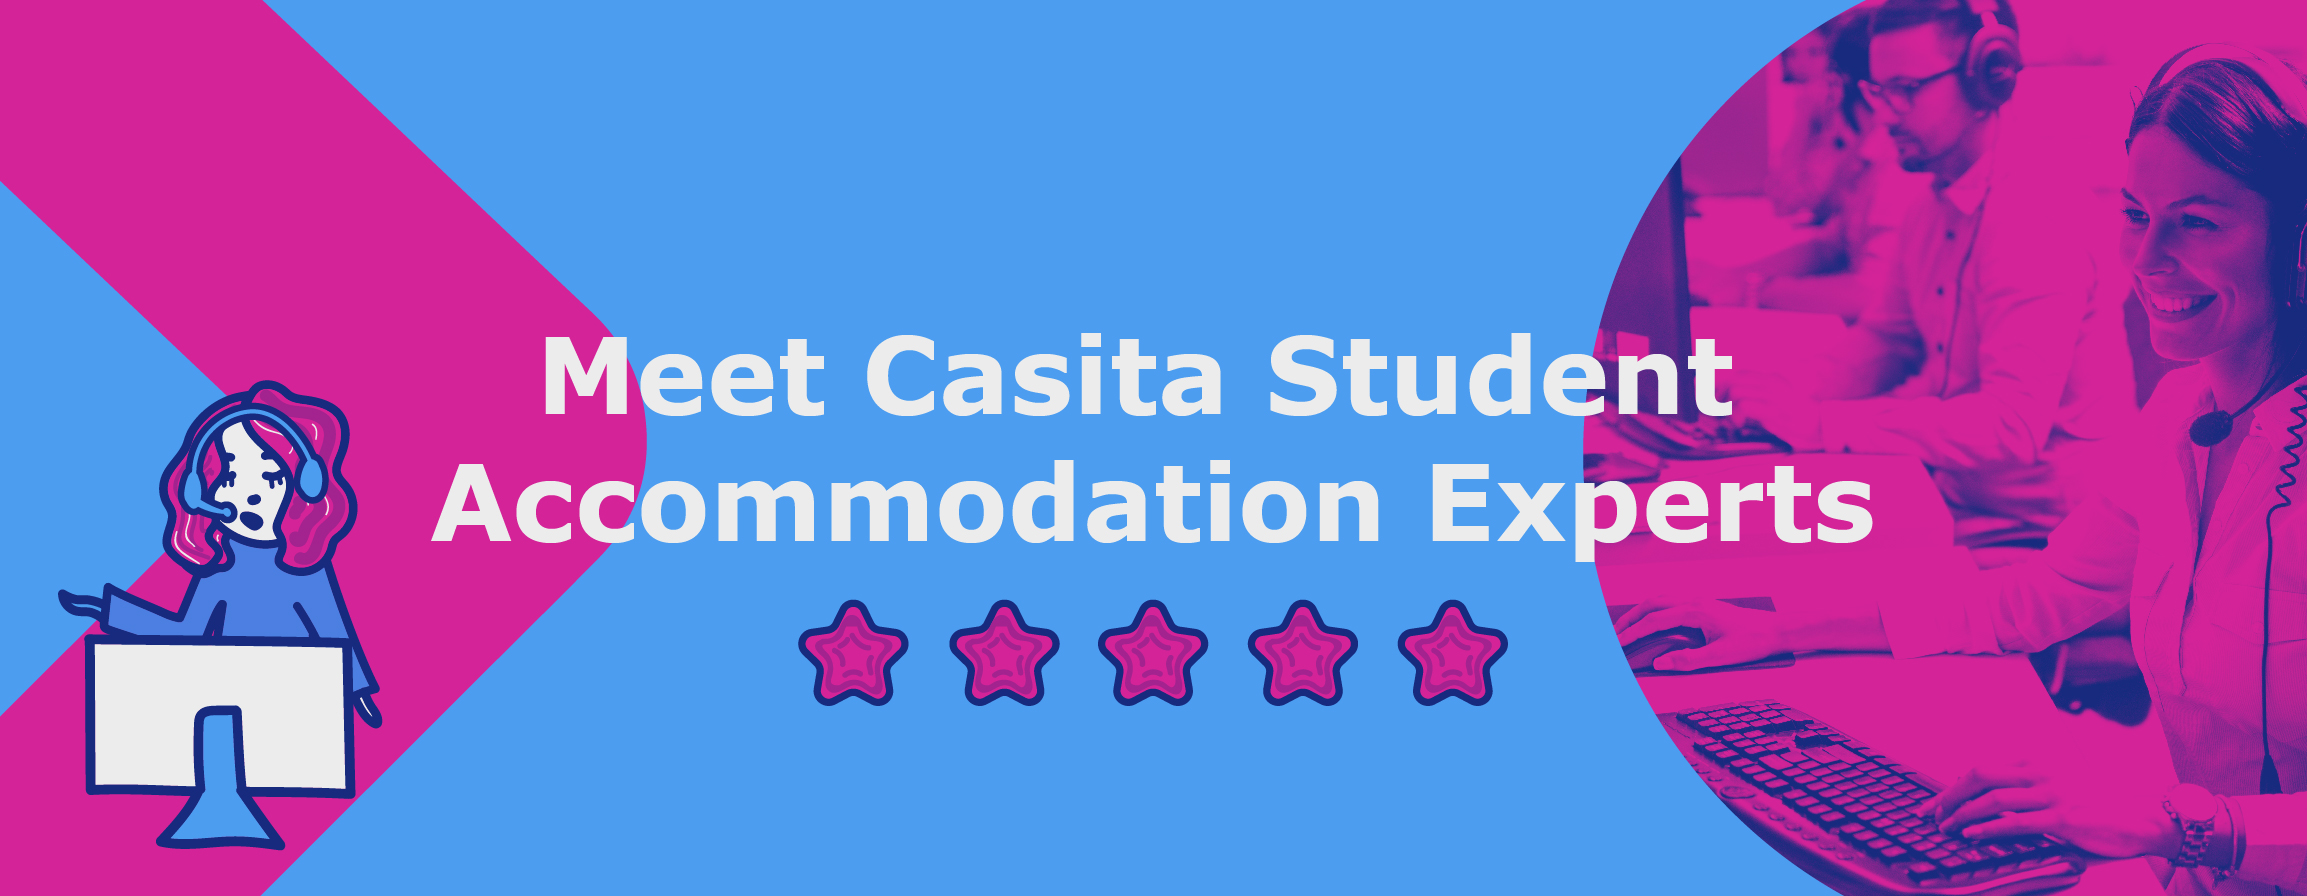 Meet Our Student Accommodation Experts